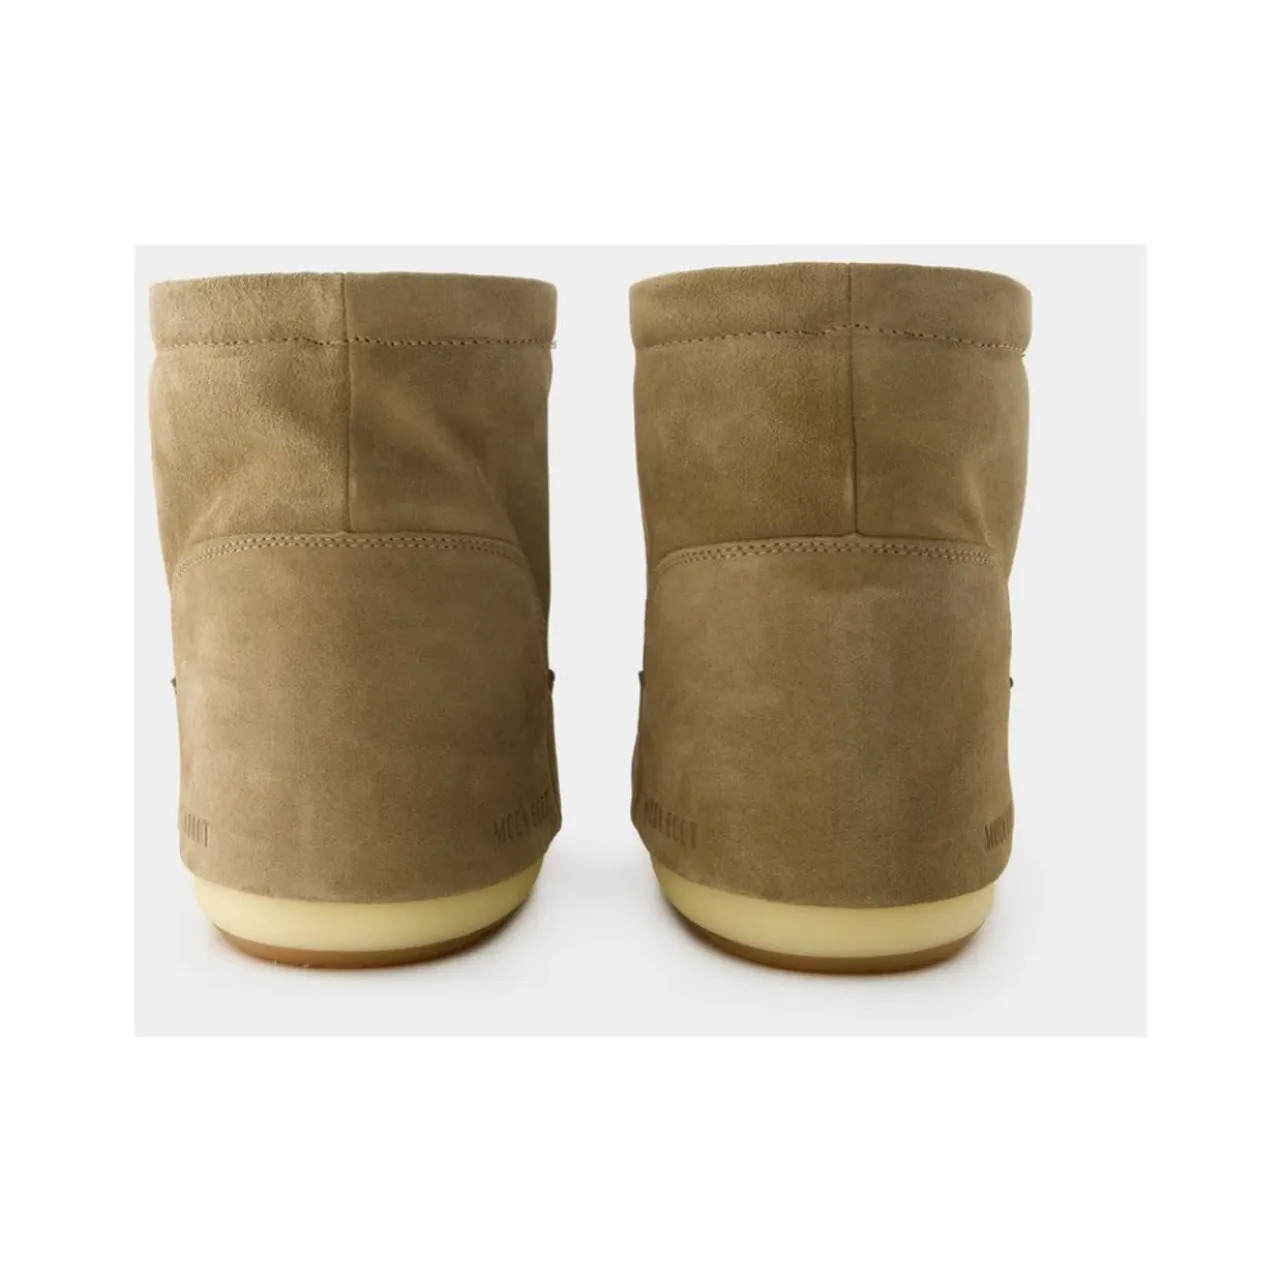 Moon Boot , Icon Low Nolace Leather Slip-On Beige ,Beige female, Sizes: